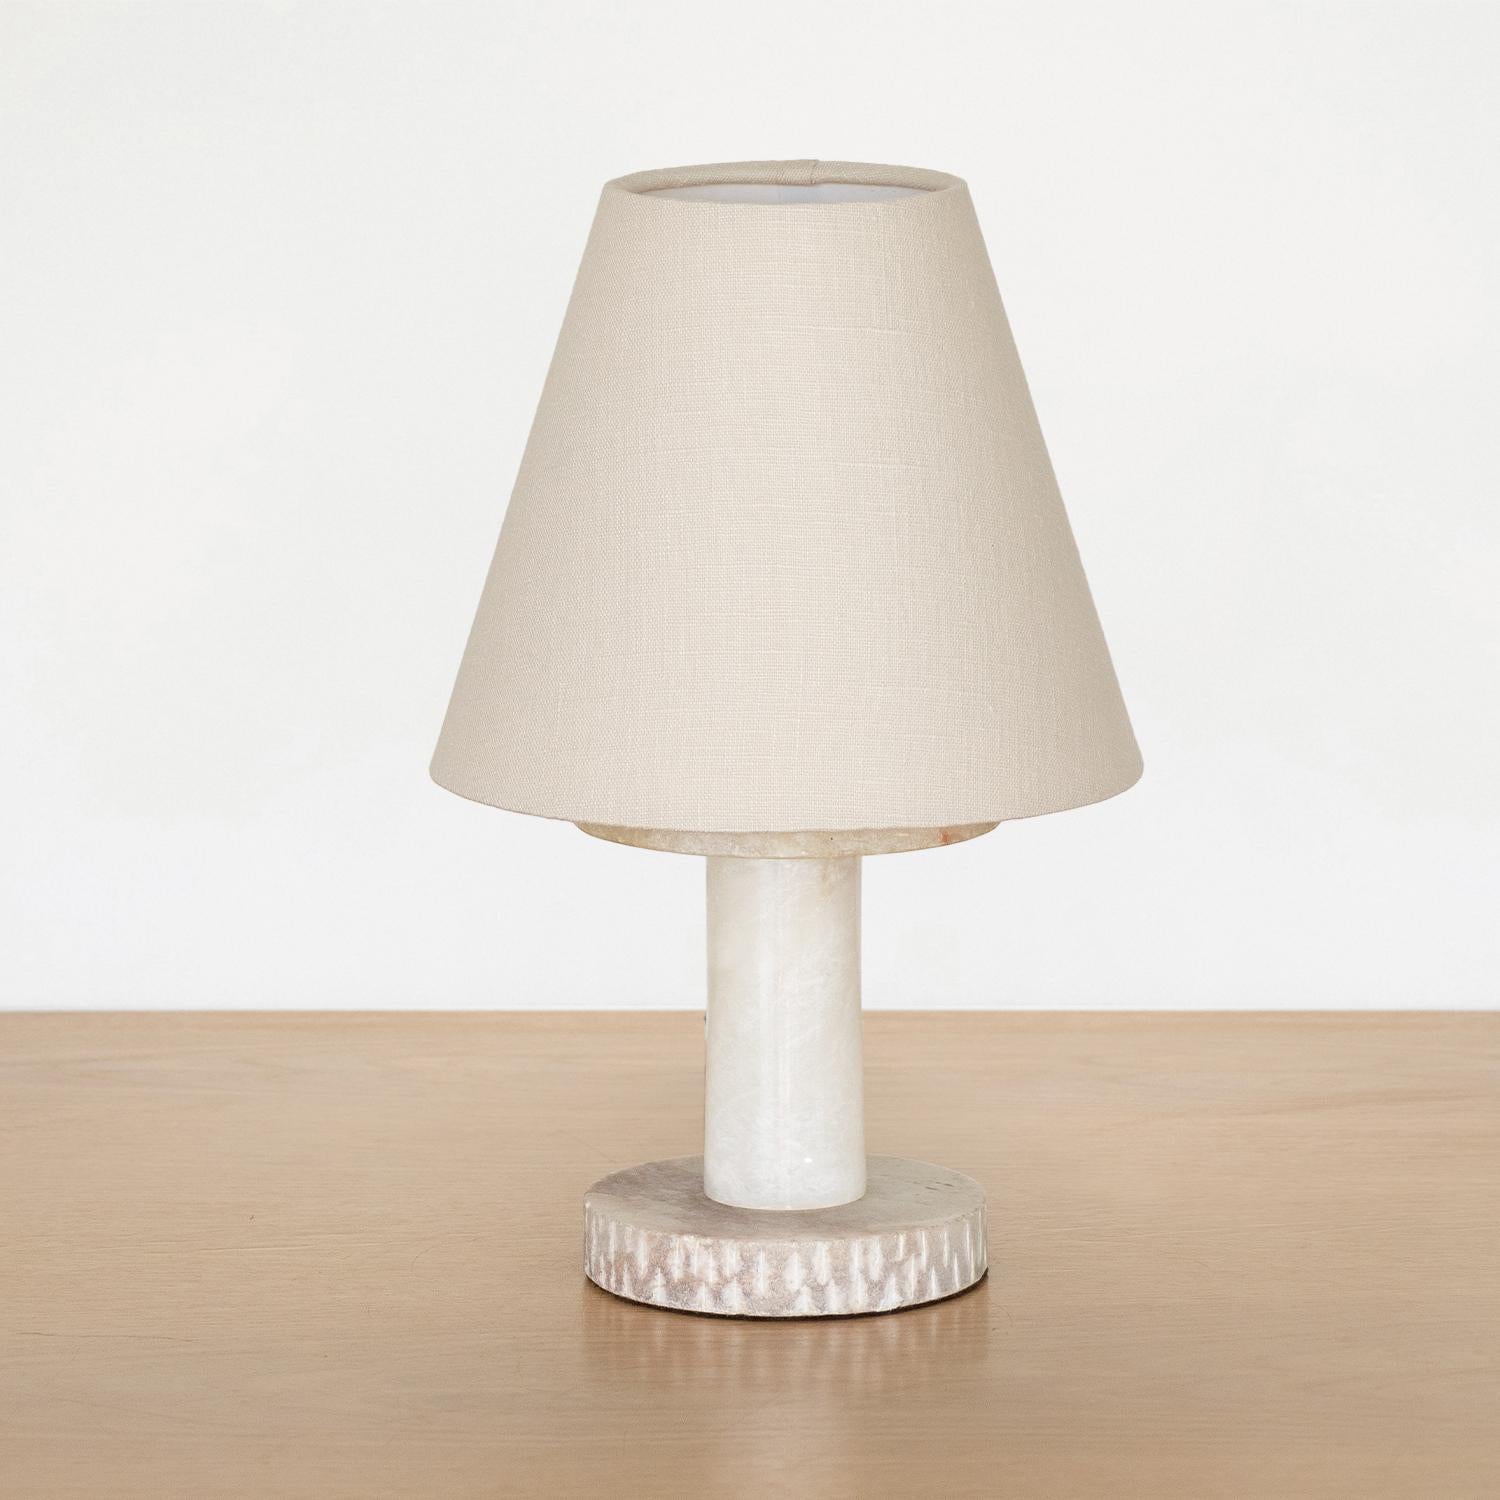 French white alabaster table lamp with solid carved base and new tapered linen shade. Modern shape with beautiful veins in stone. Newly rewired.